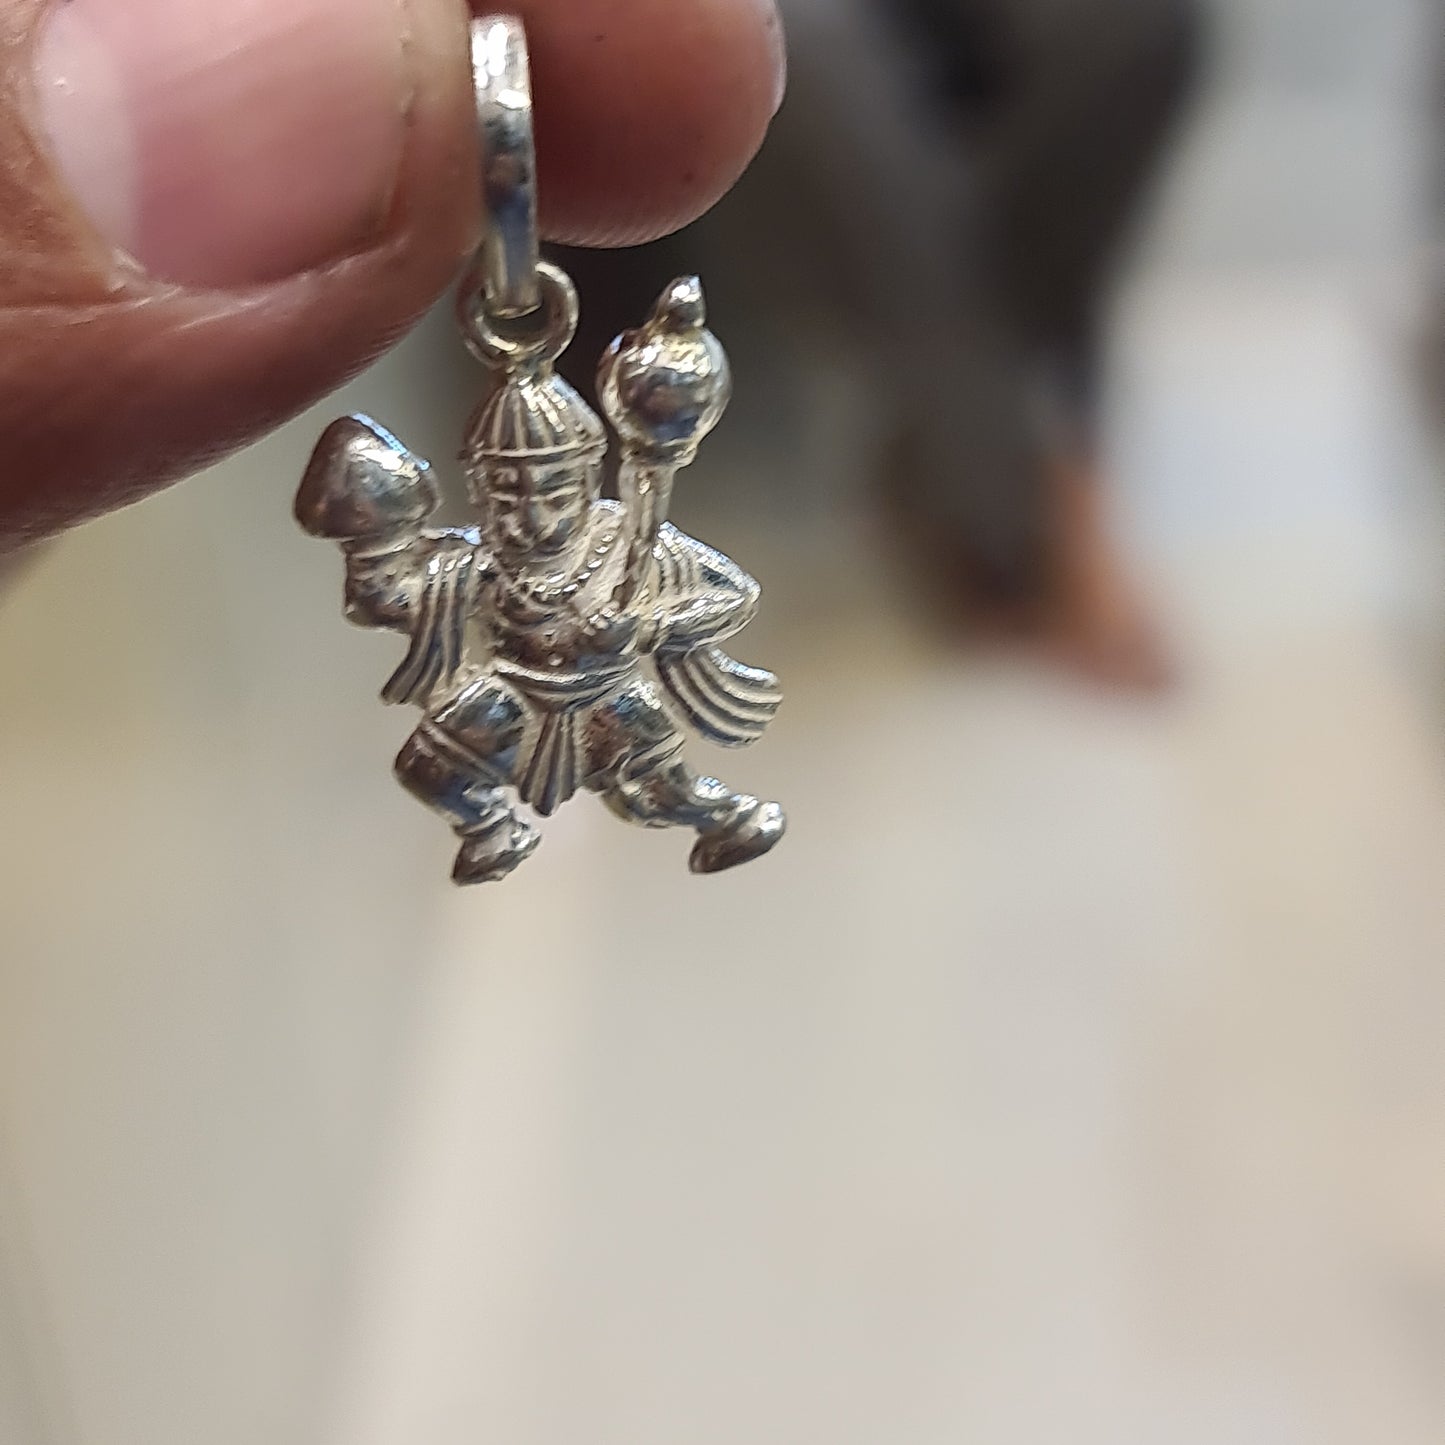 Divine Grace in Silver: Hanuman Pendant, a Symbol of Strength and Protection